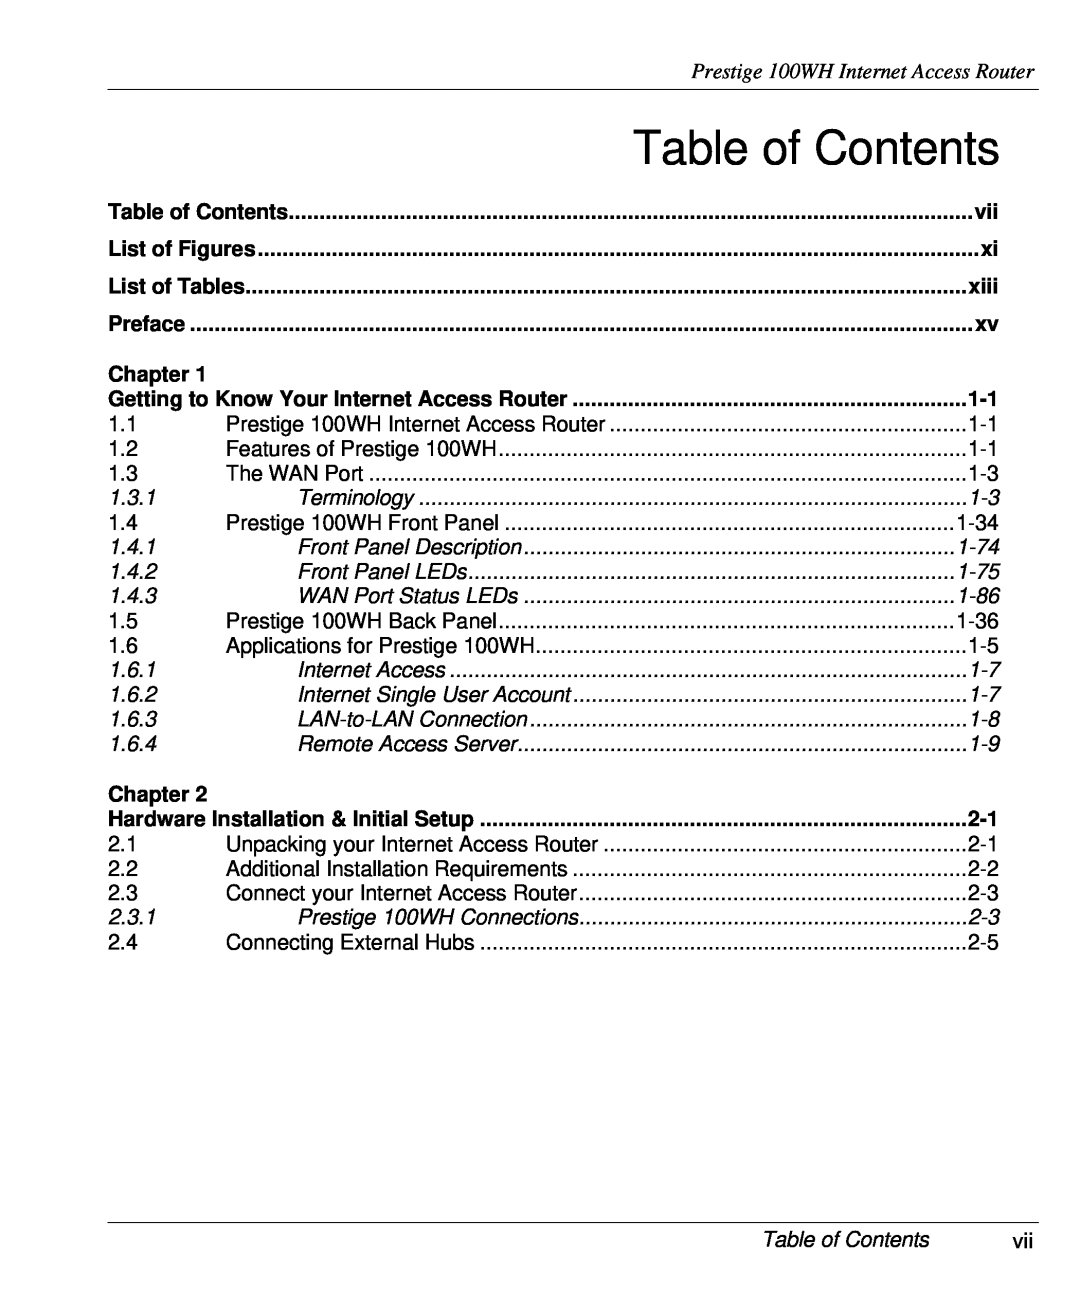 ZyXEL Communications user manual Table of Contents, Prestige 100WH Internet Access Router, xiii, Chapter 